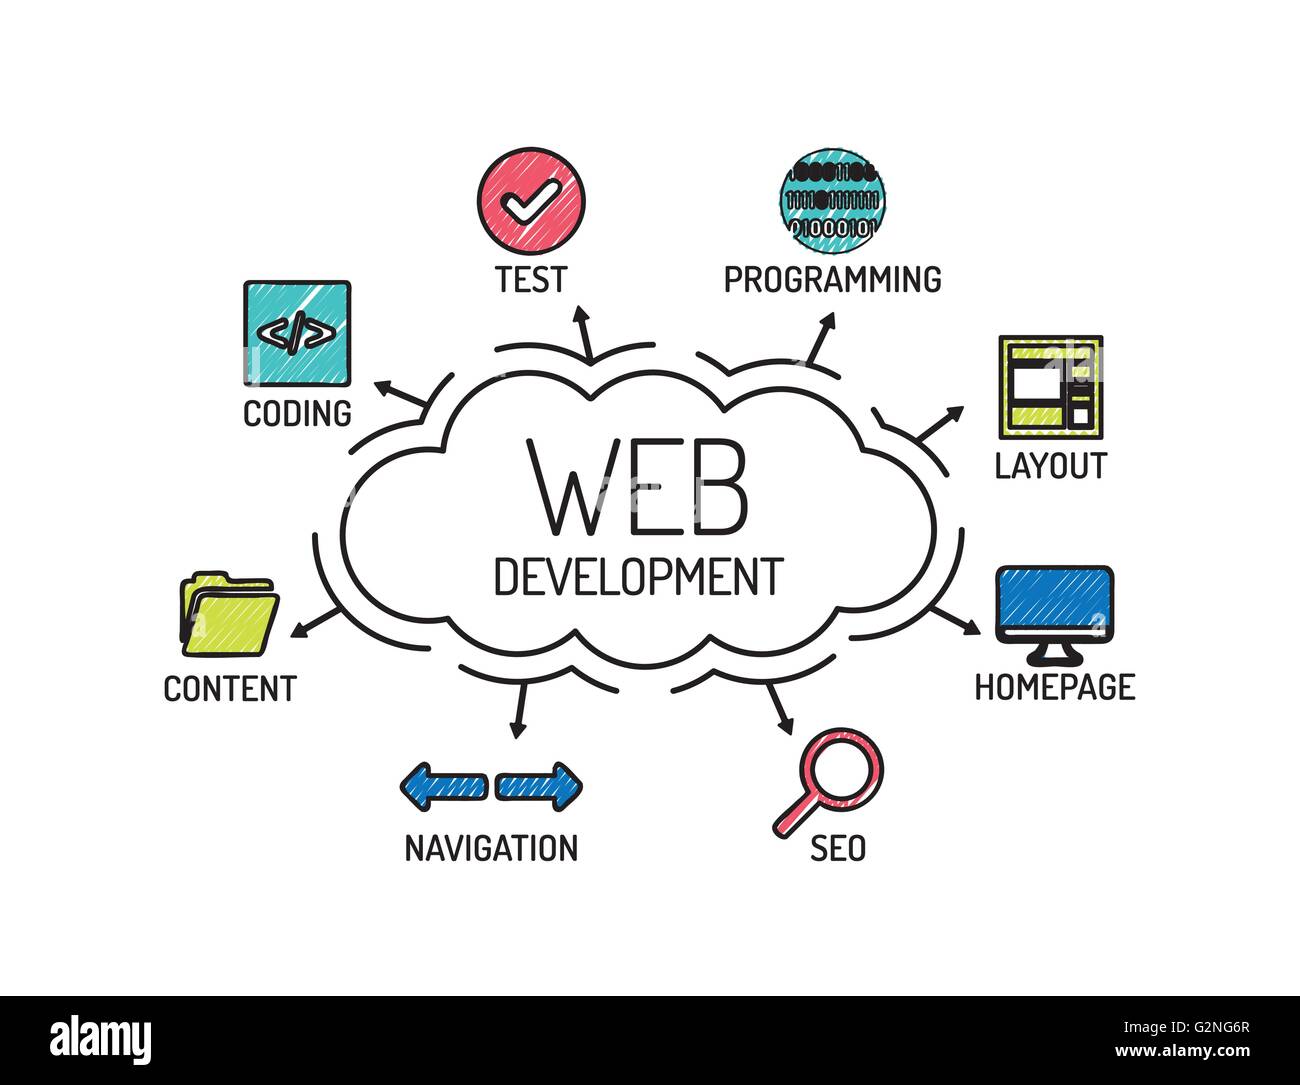 web-development-chart-with-keywords-and-icons-sketch-stock-vector-image-art-alamy